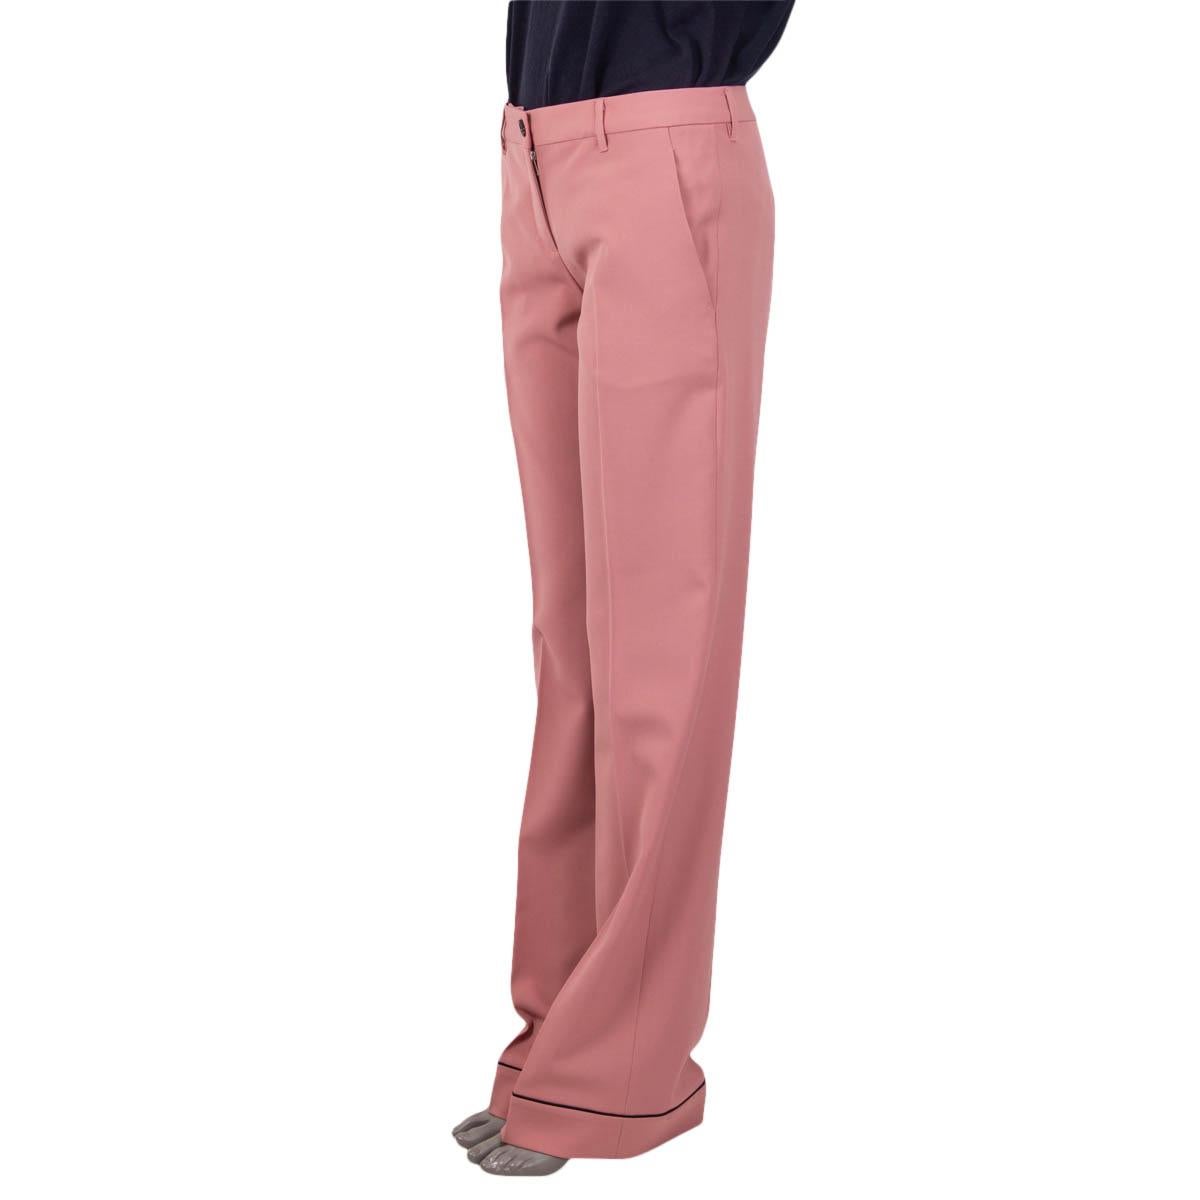 100% authentic Miu Miu wide-leg pants in pink and black virgin wool (98%) and elastane (2%). Feature two slit pockets on the front and one sewn shut slit pocket on the back. Have black piped cuffs and a mid-rise fit. Open with two buttons and a